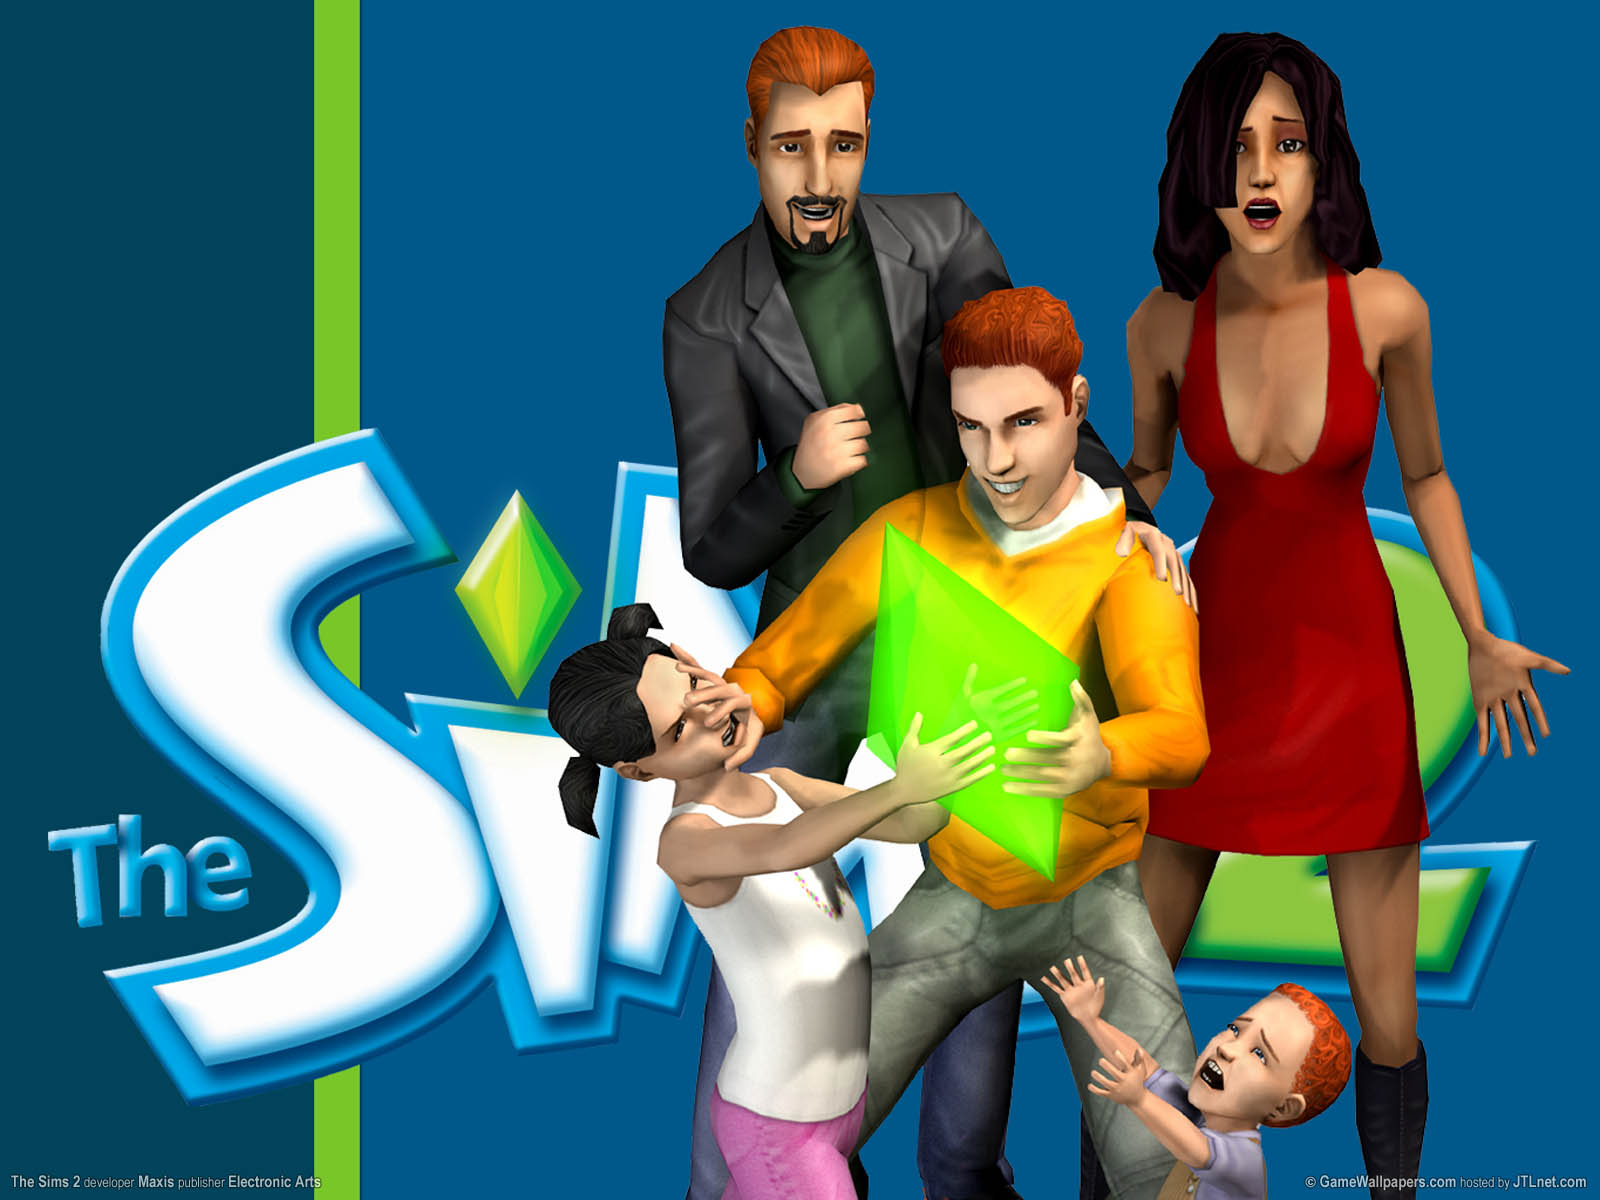 The Sims 2 Wallpaper 02 1600x1200 Images, Photos, Reviews